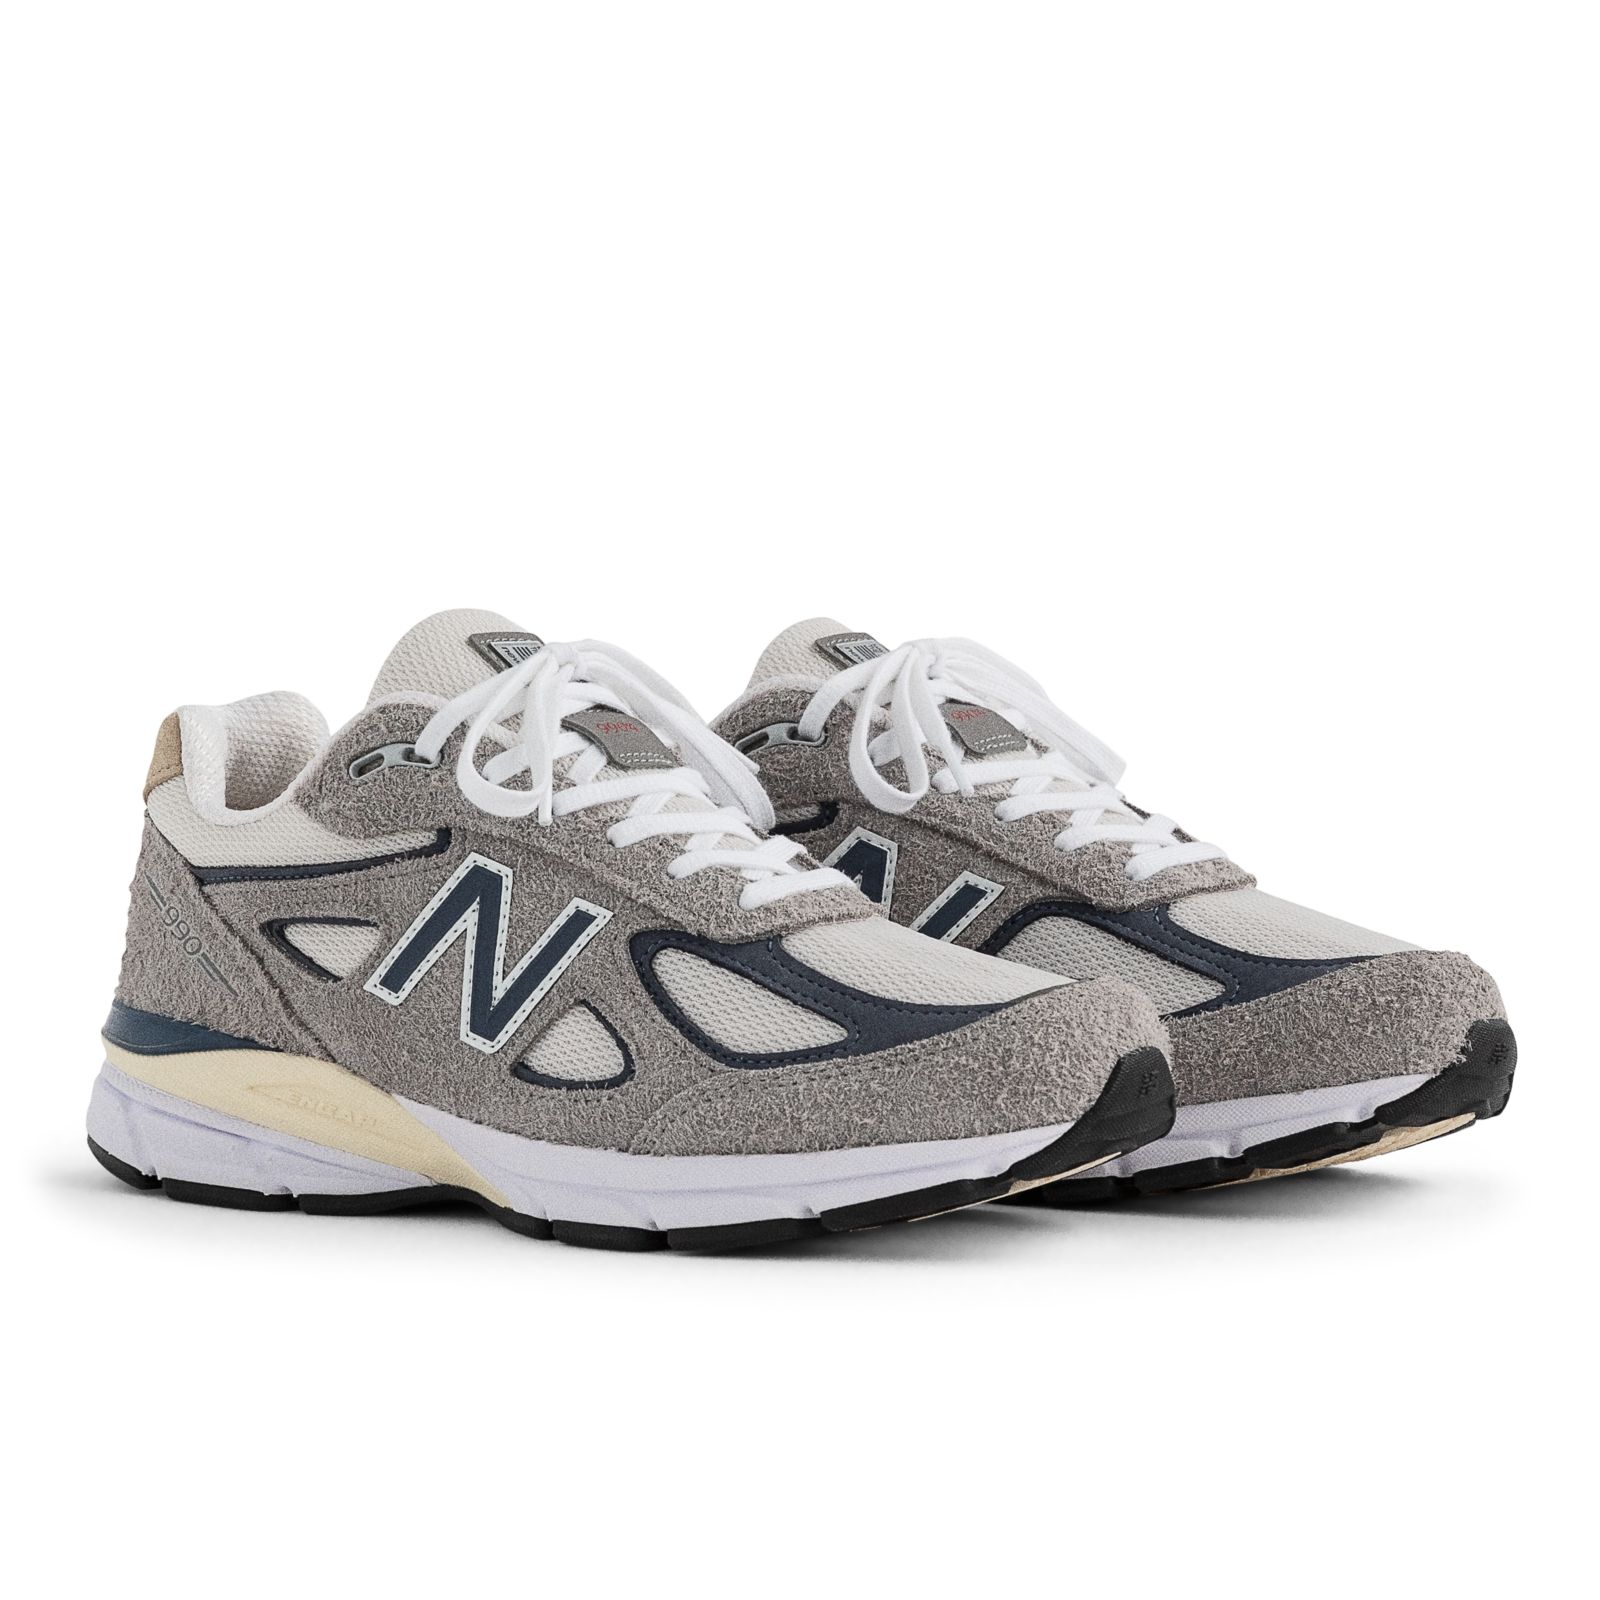 Unisex Made in USA 990v4 Shoes - New Balance